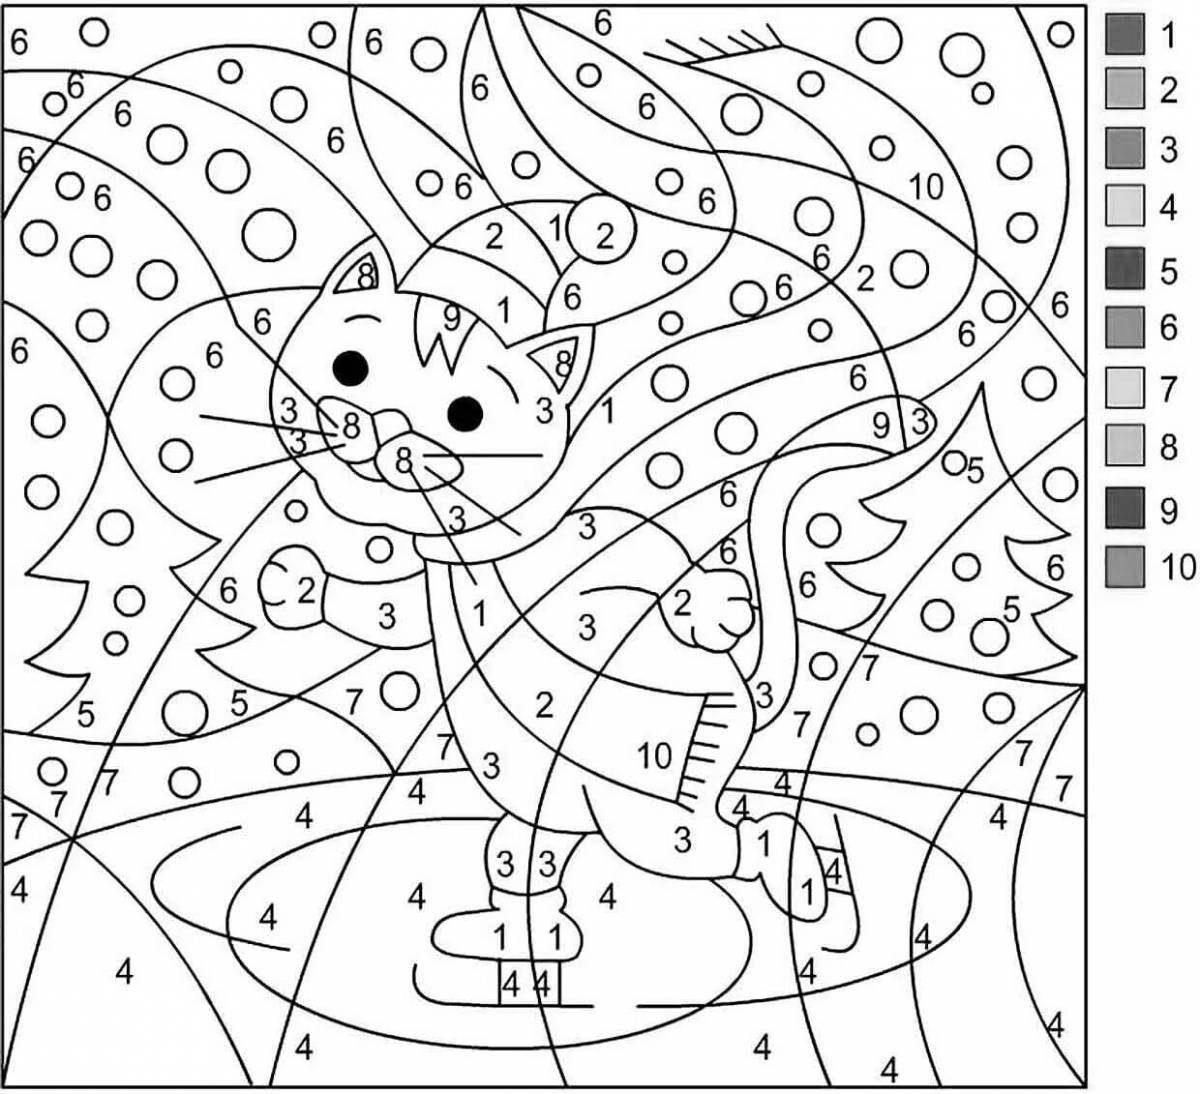 Creative free coloring by numbers